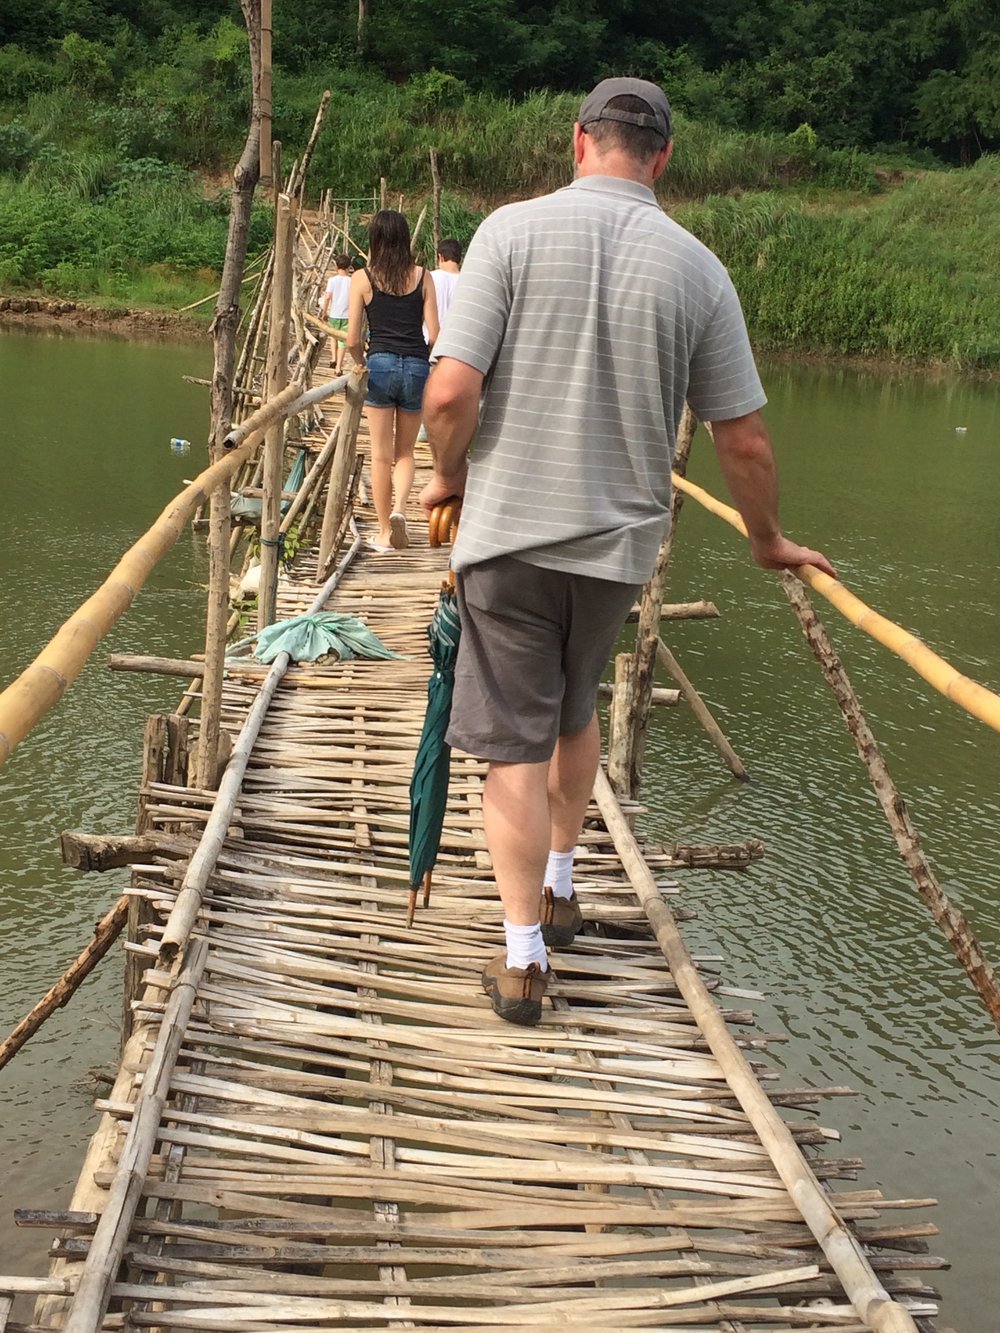 Villagers build this bridge, Mekong knocks it down, they build it again. 